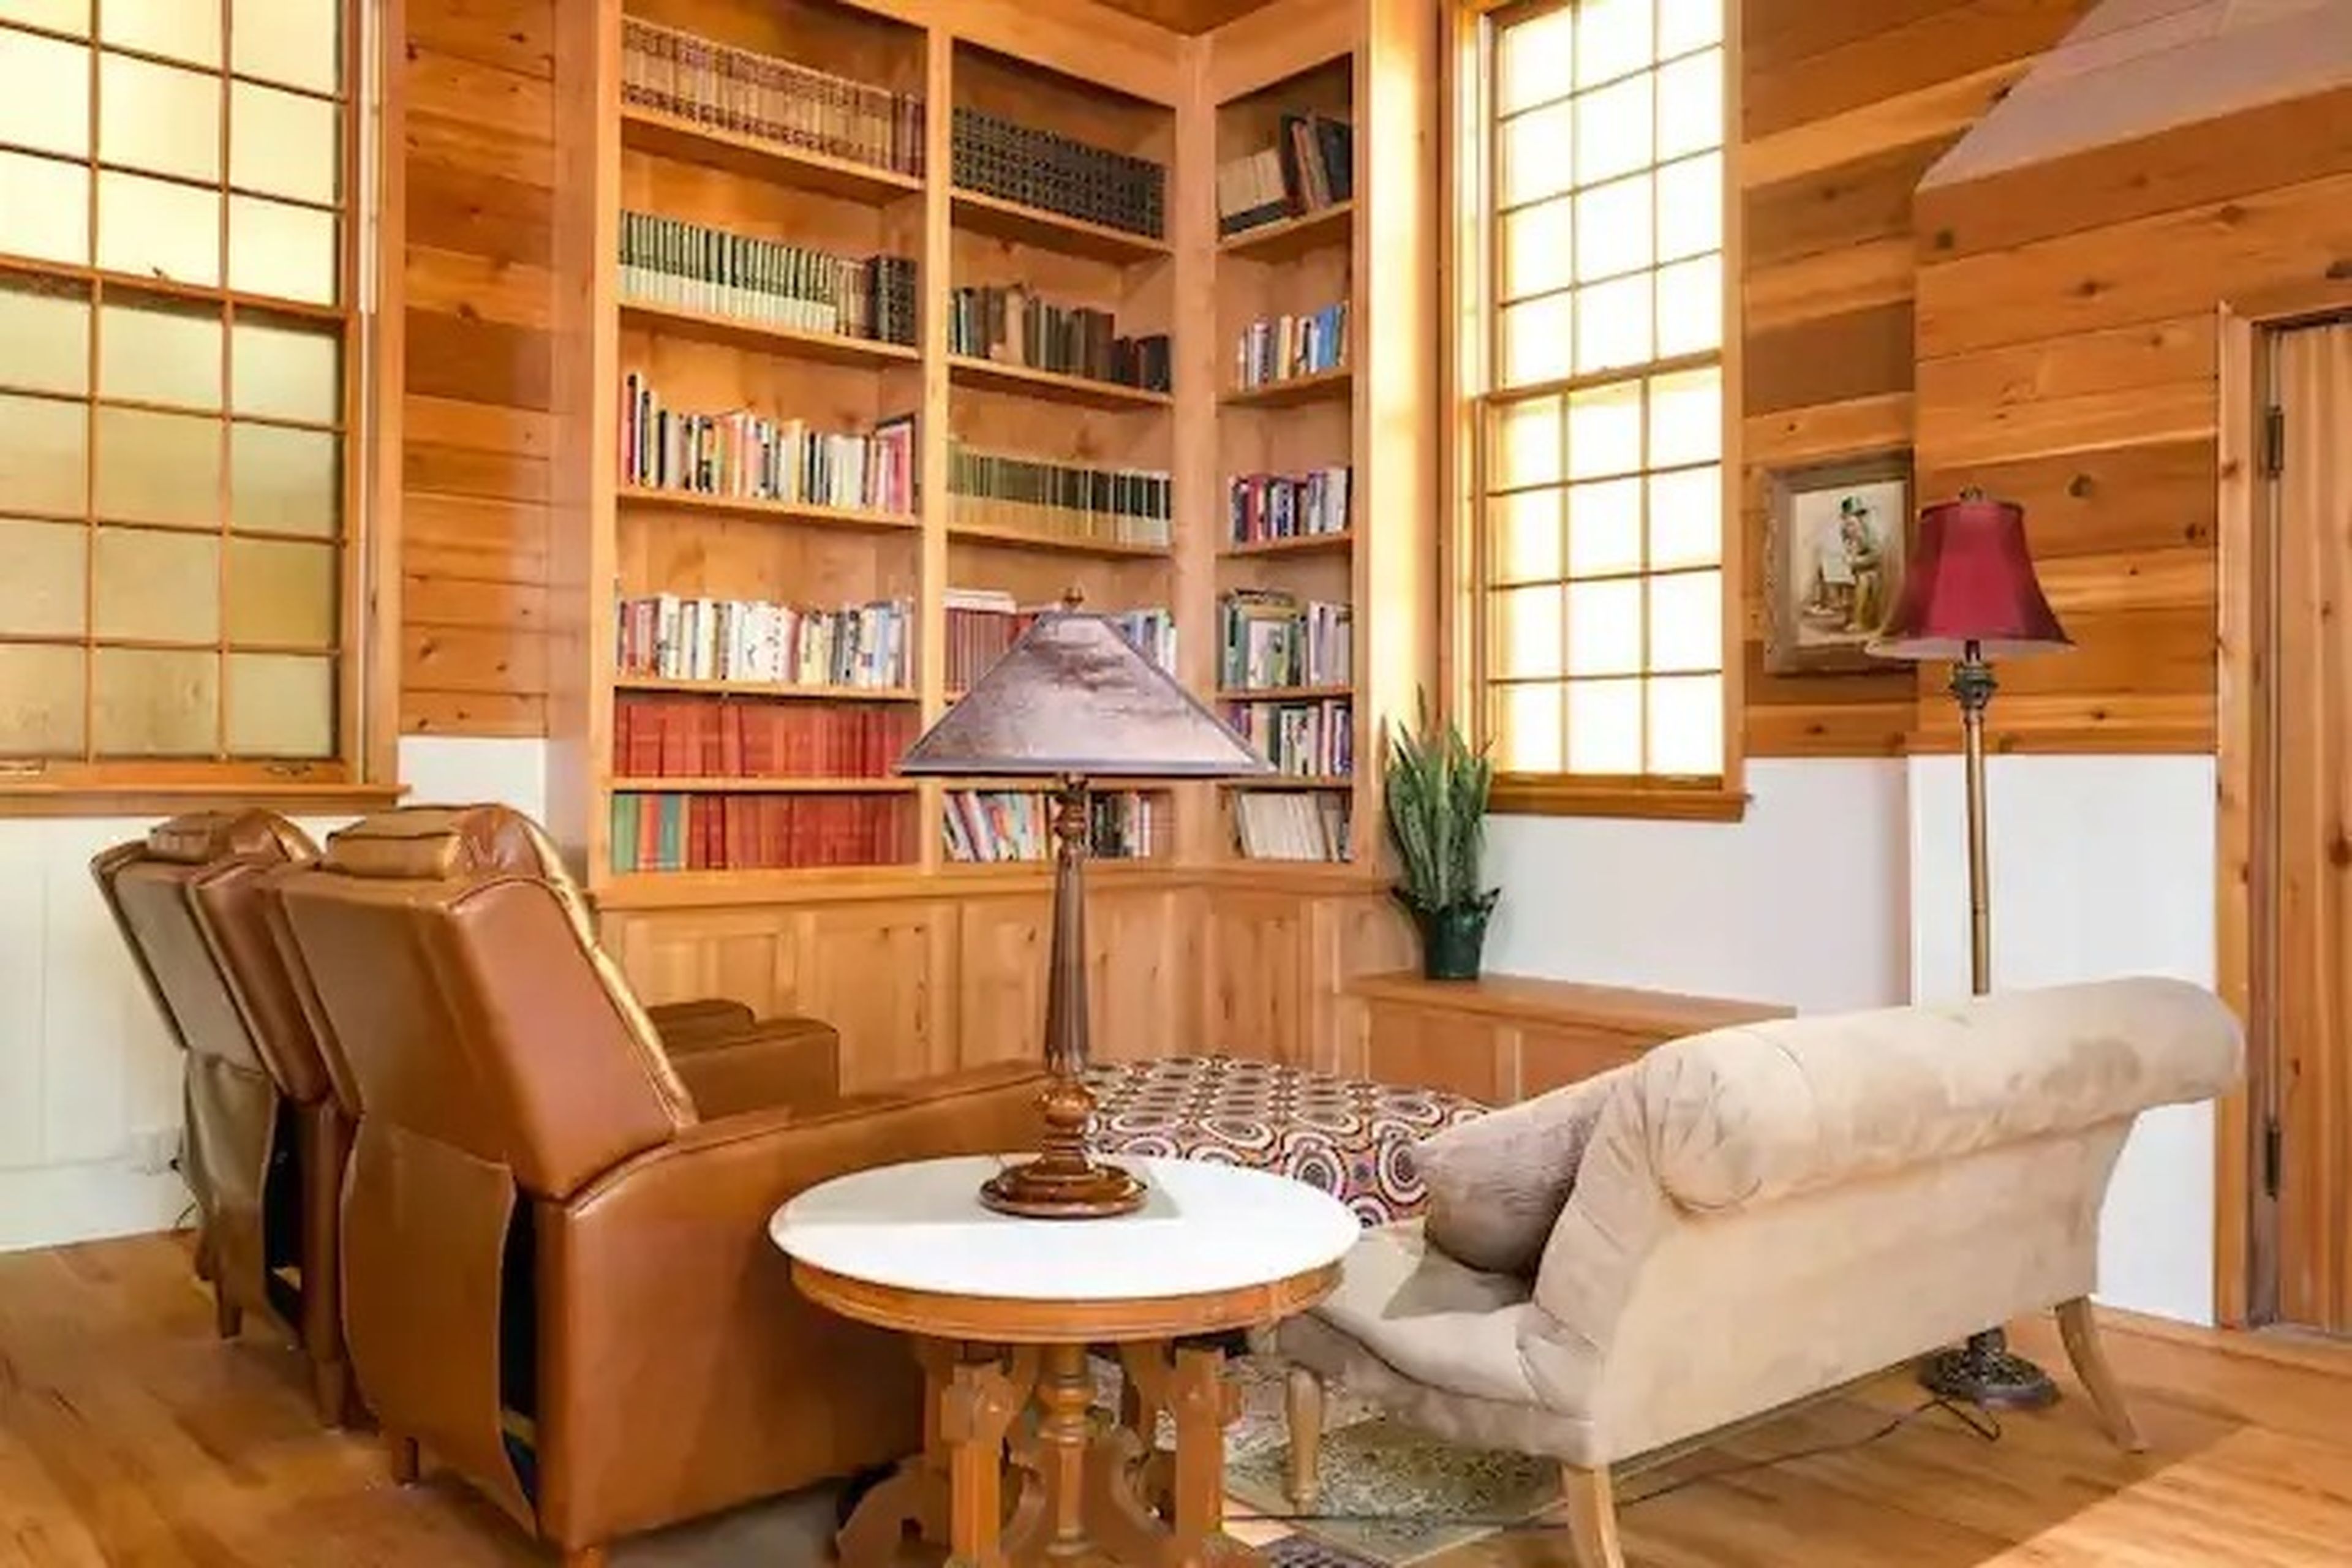 A corner of a room with high ceilings, built-in bookshelves, and seating.